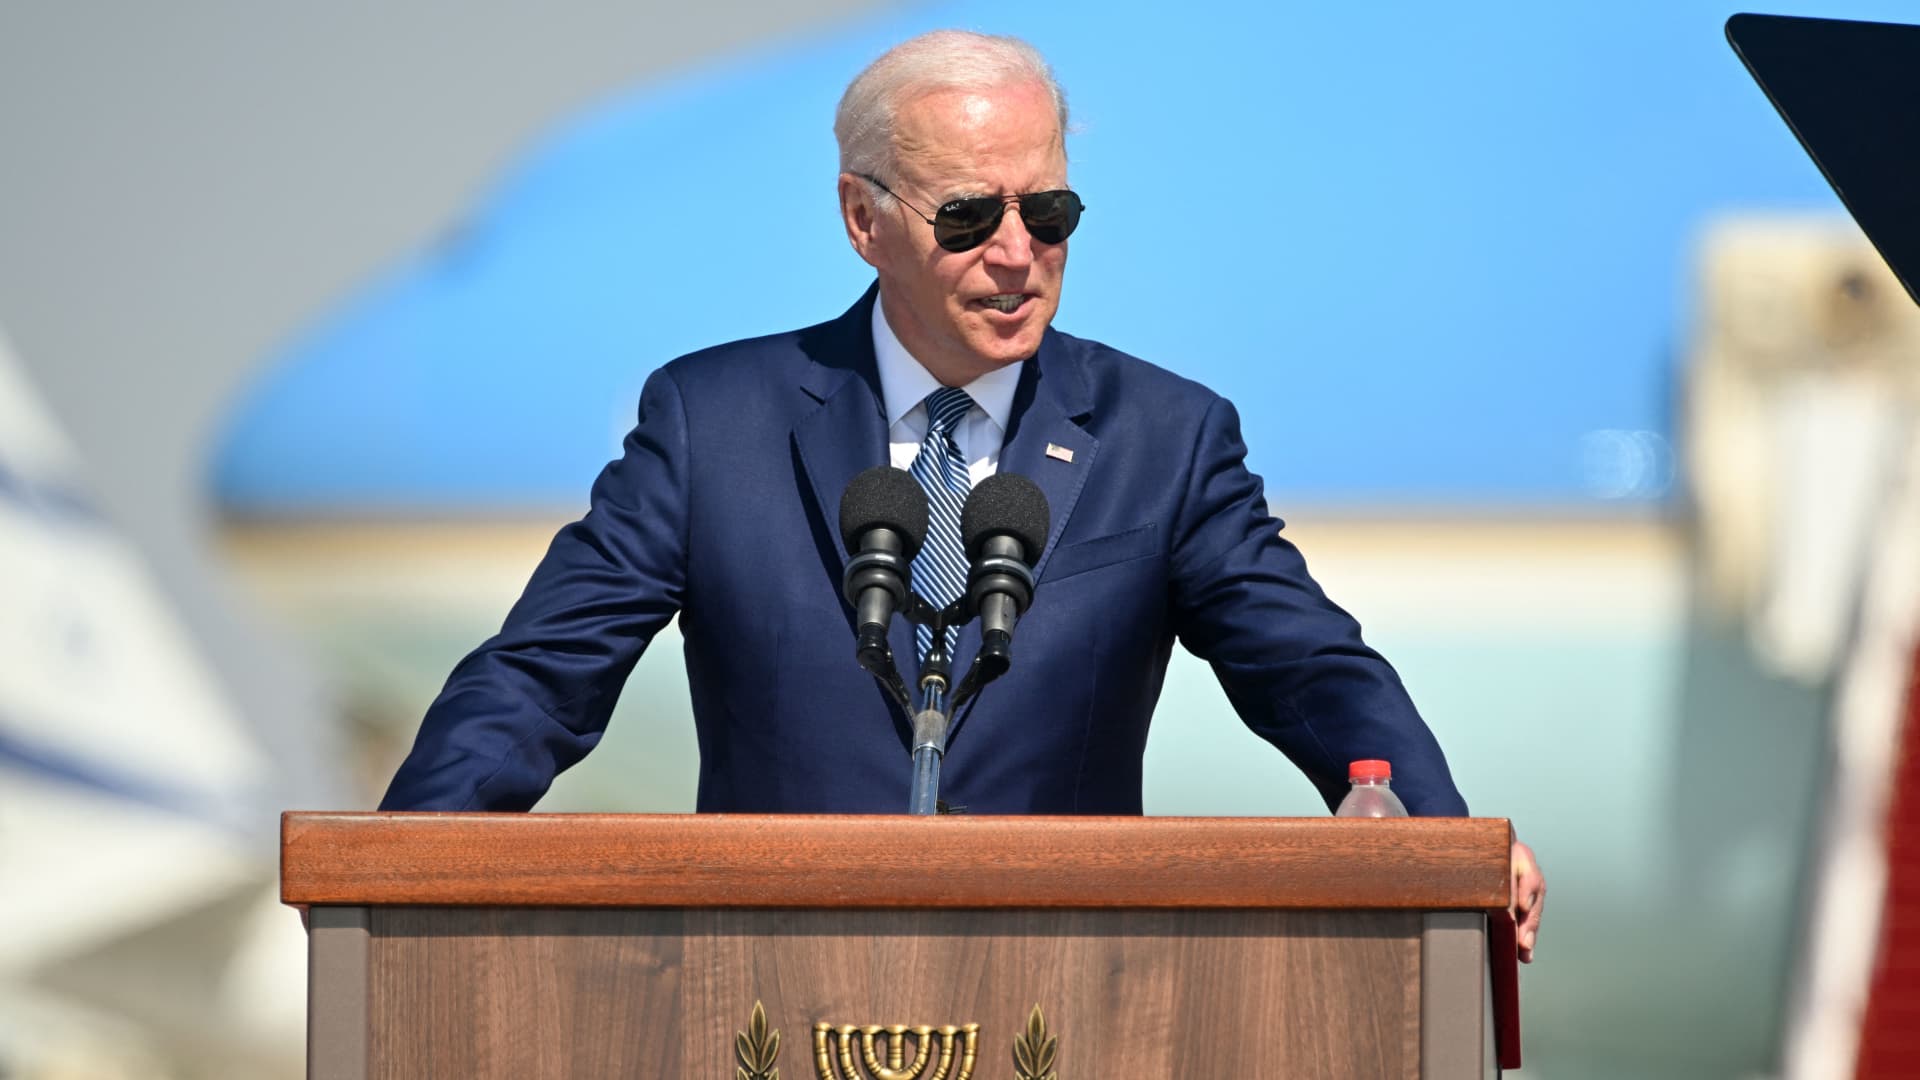 Biden’s economic approval rating falls to new low on fear about inflation CNBC survey finds – CNBC